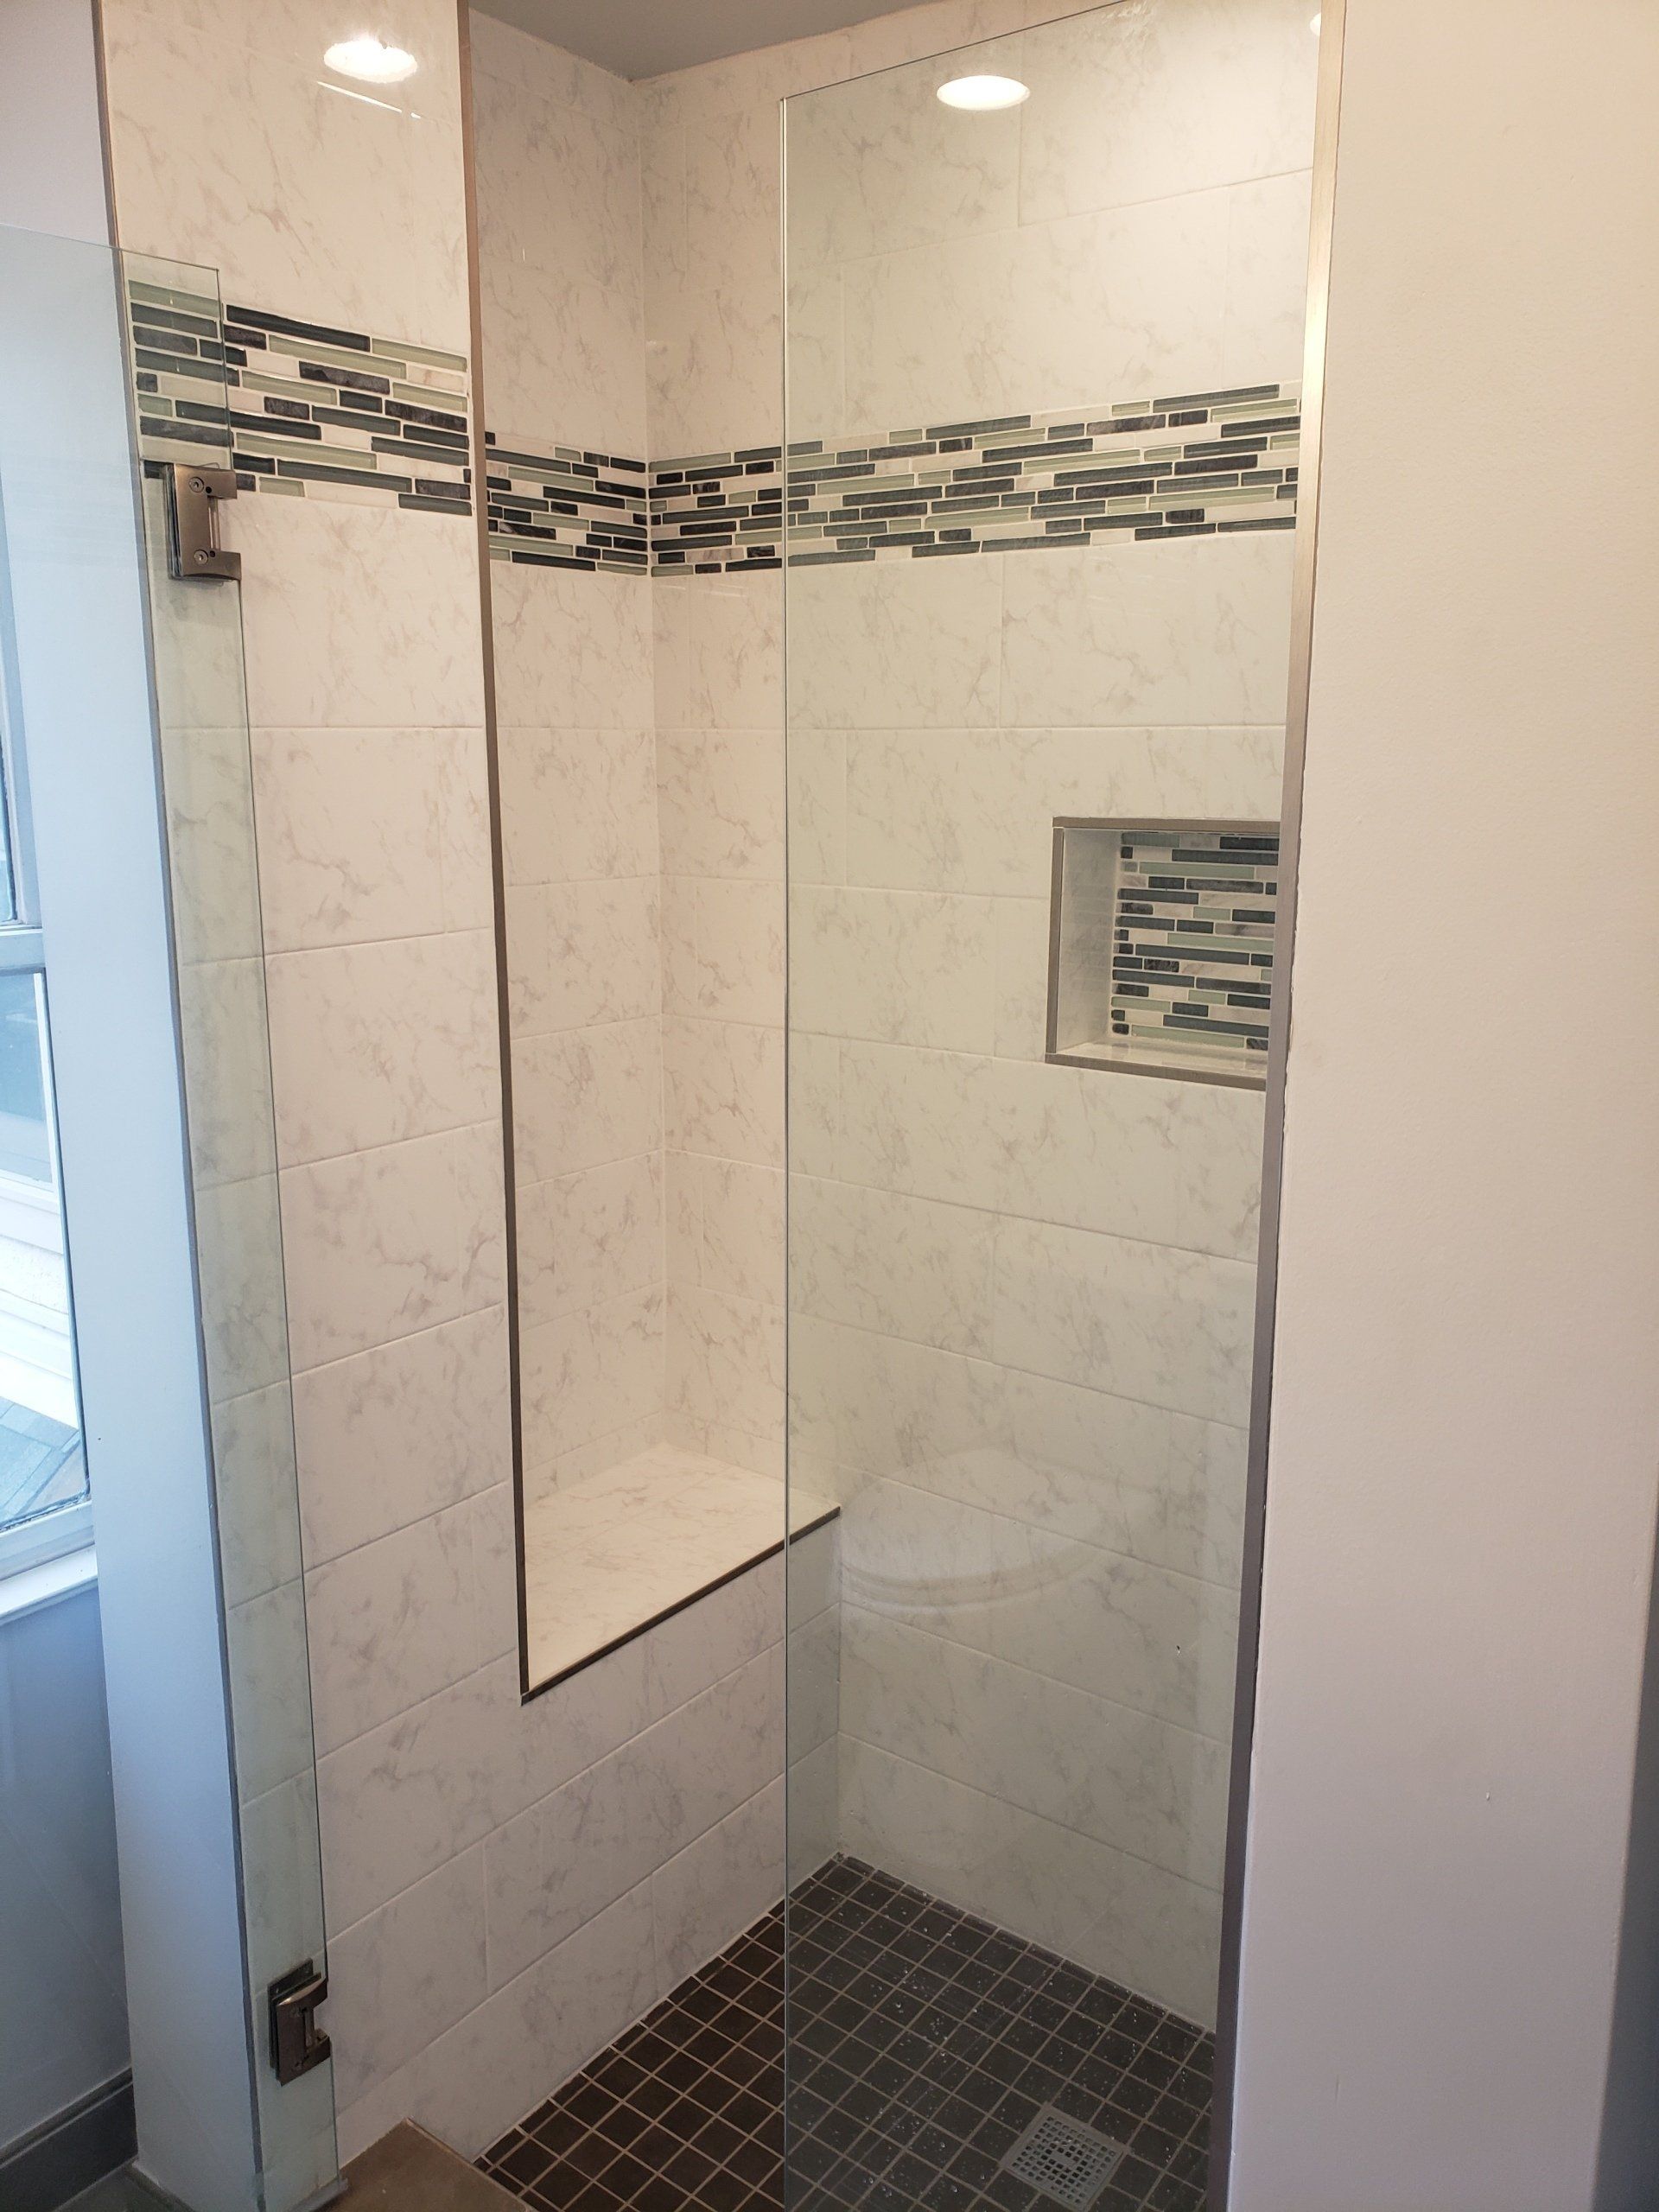 tile work in shower stall with bench and shower niche in elkins park bathroom remodel